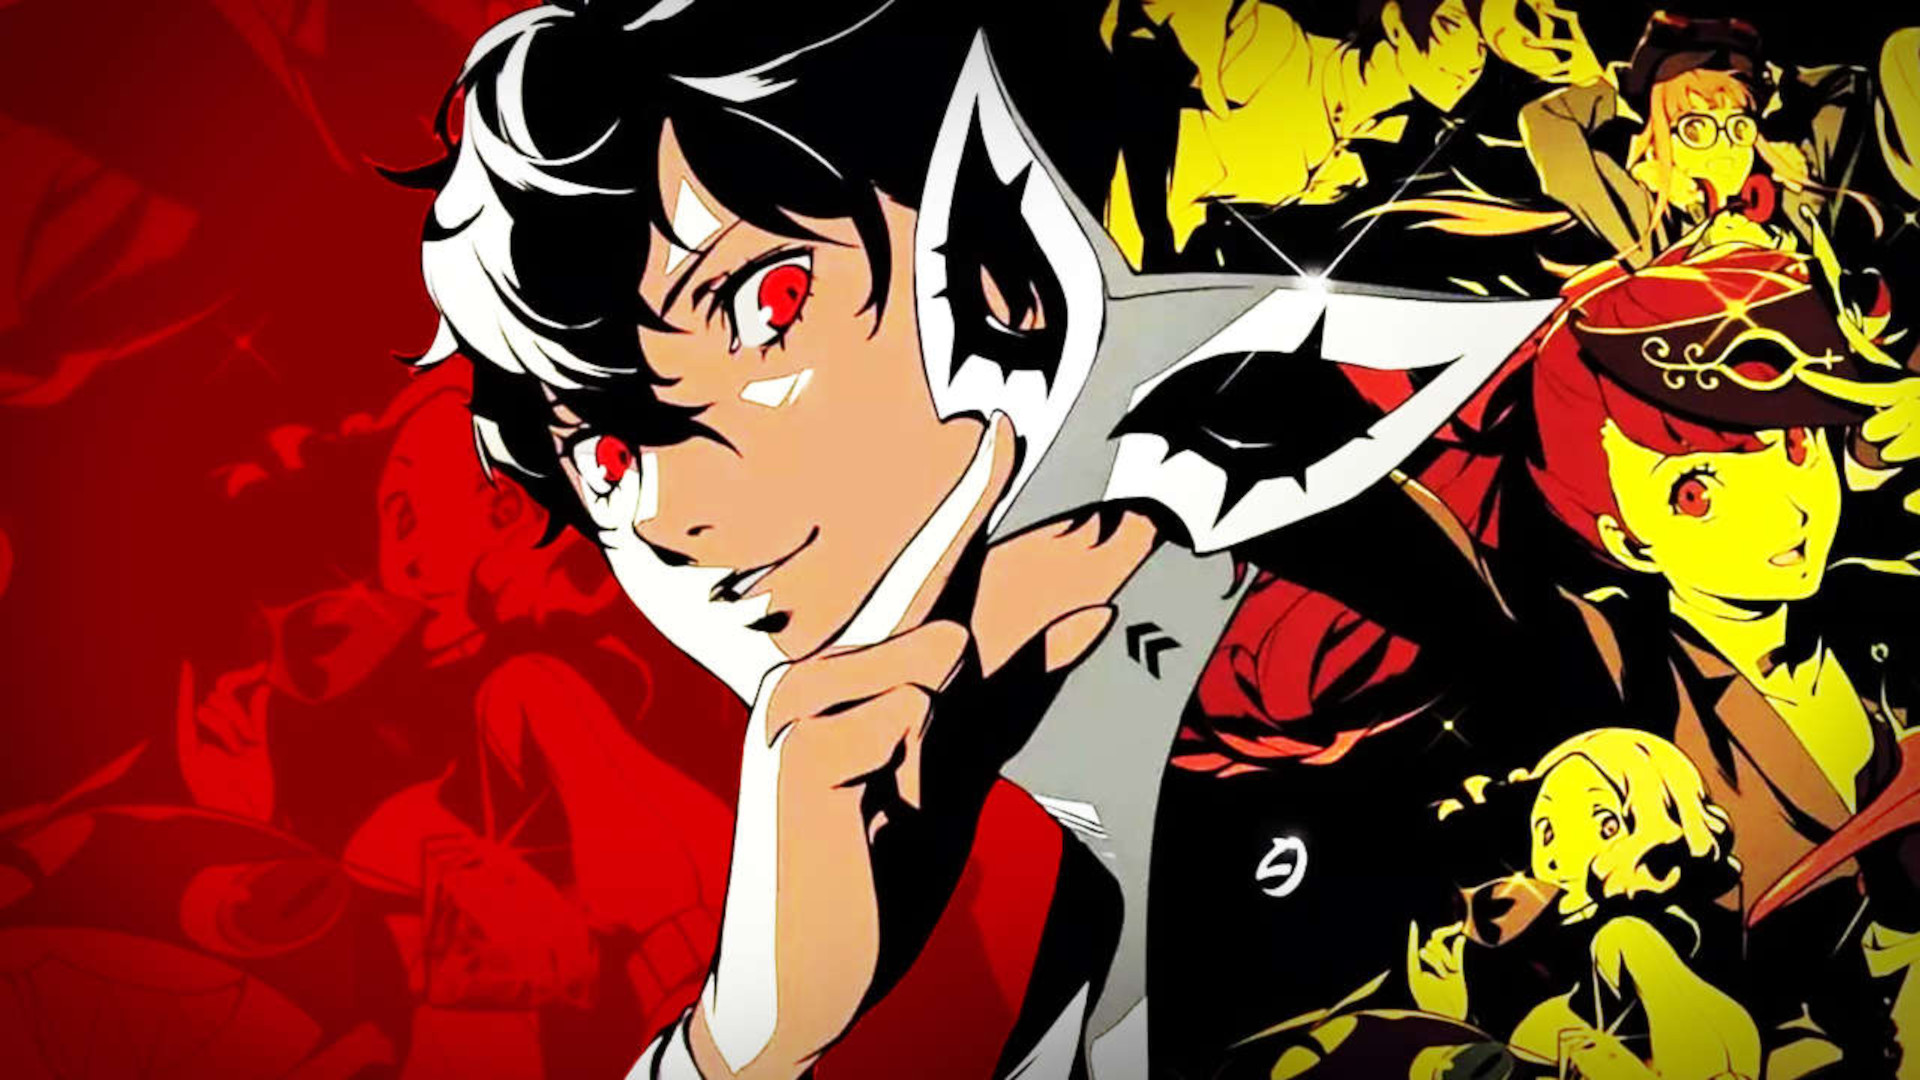 Persona 5 characters – all playable Phantom Thieves